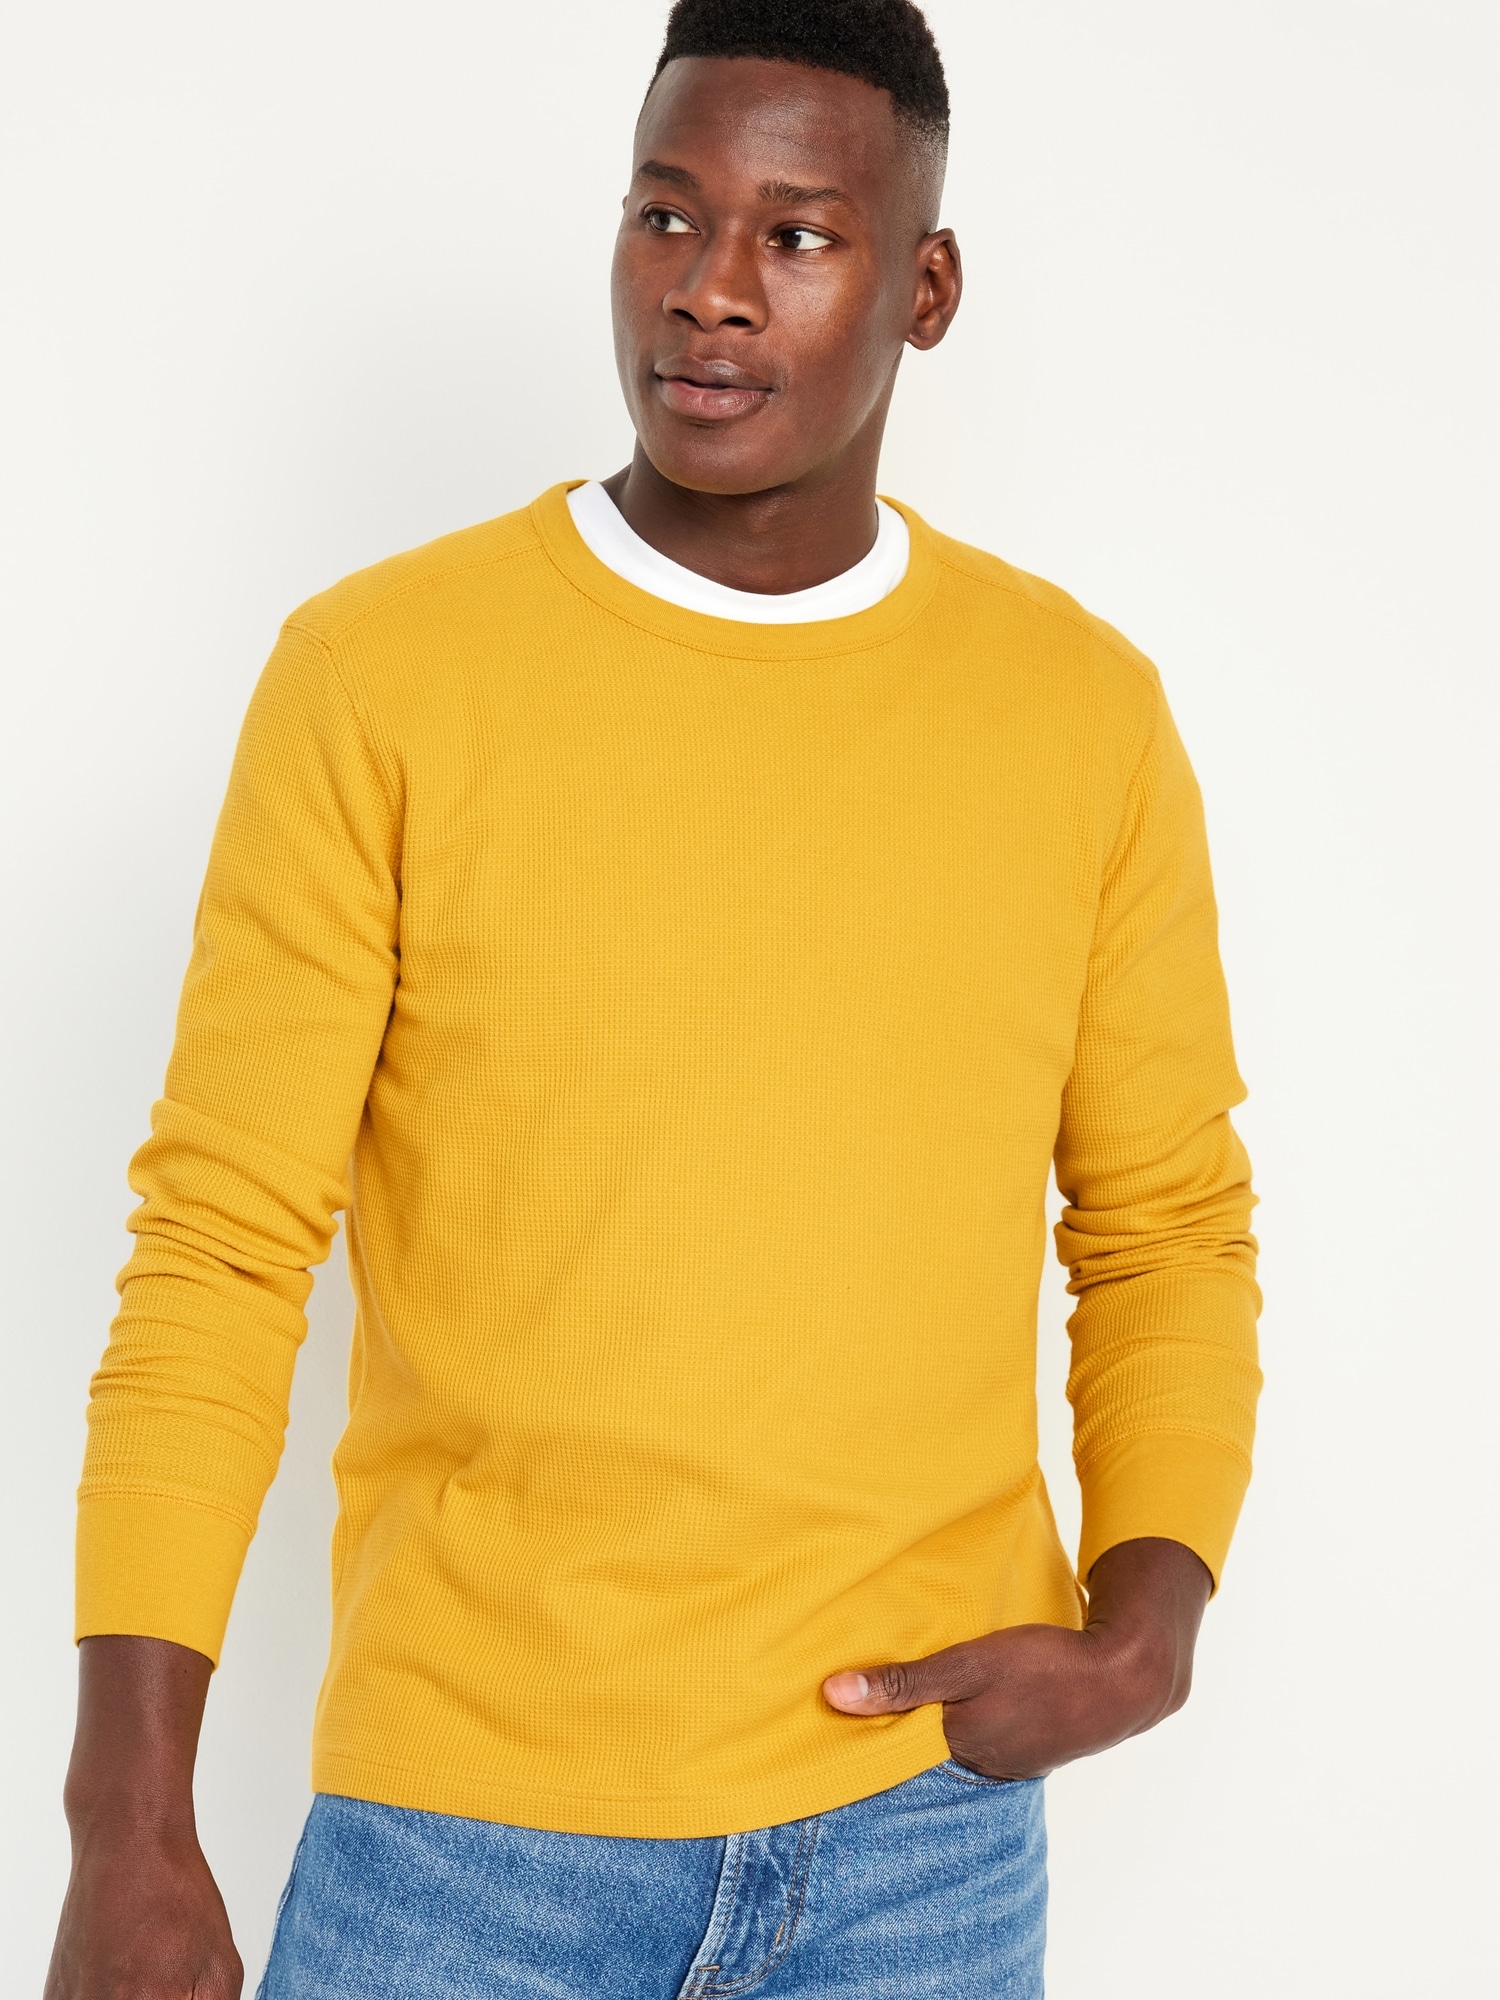 Long-Sleeve Built-In Flex Waffle-Knit T-Shirt for Men | Old Navy